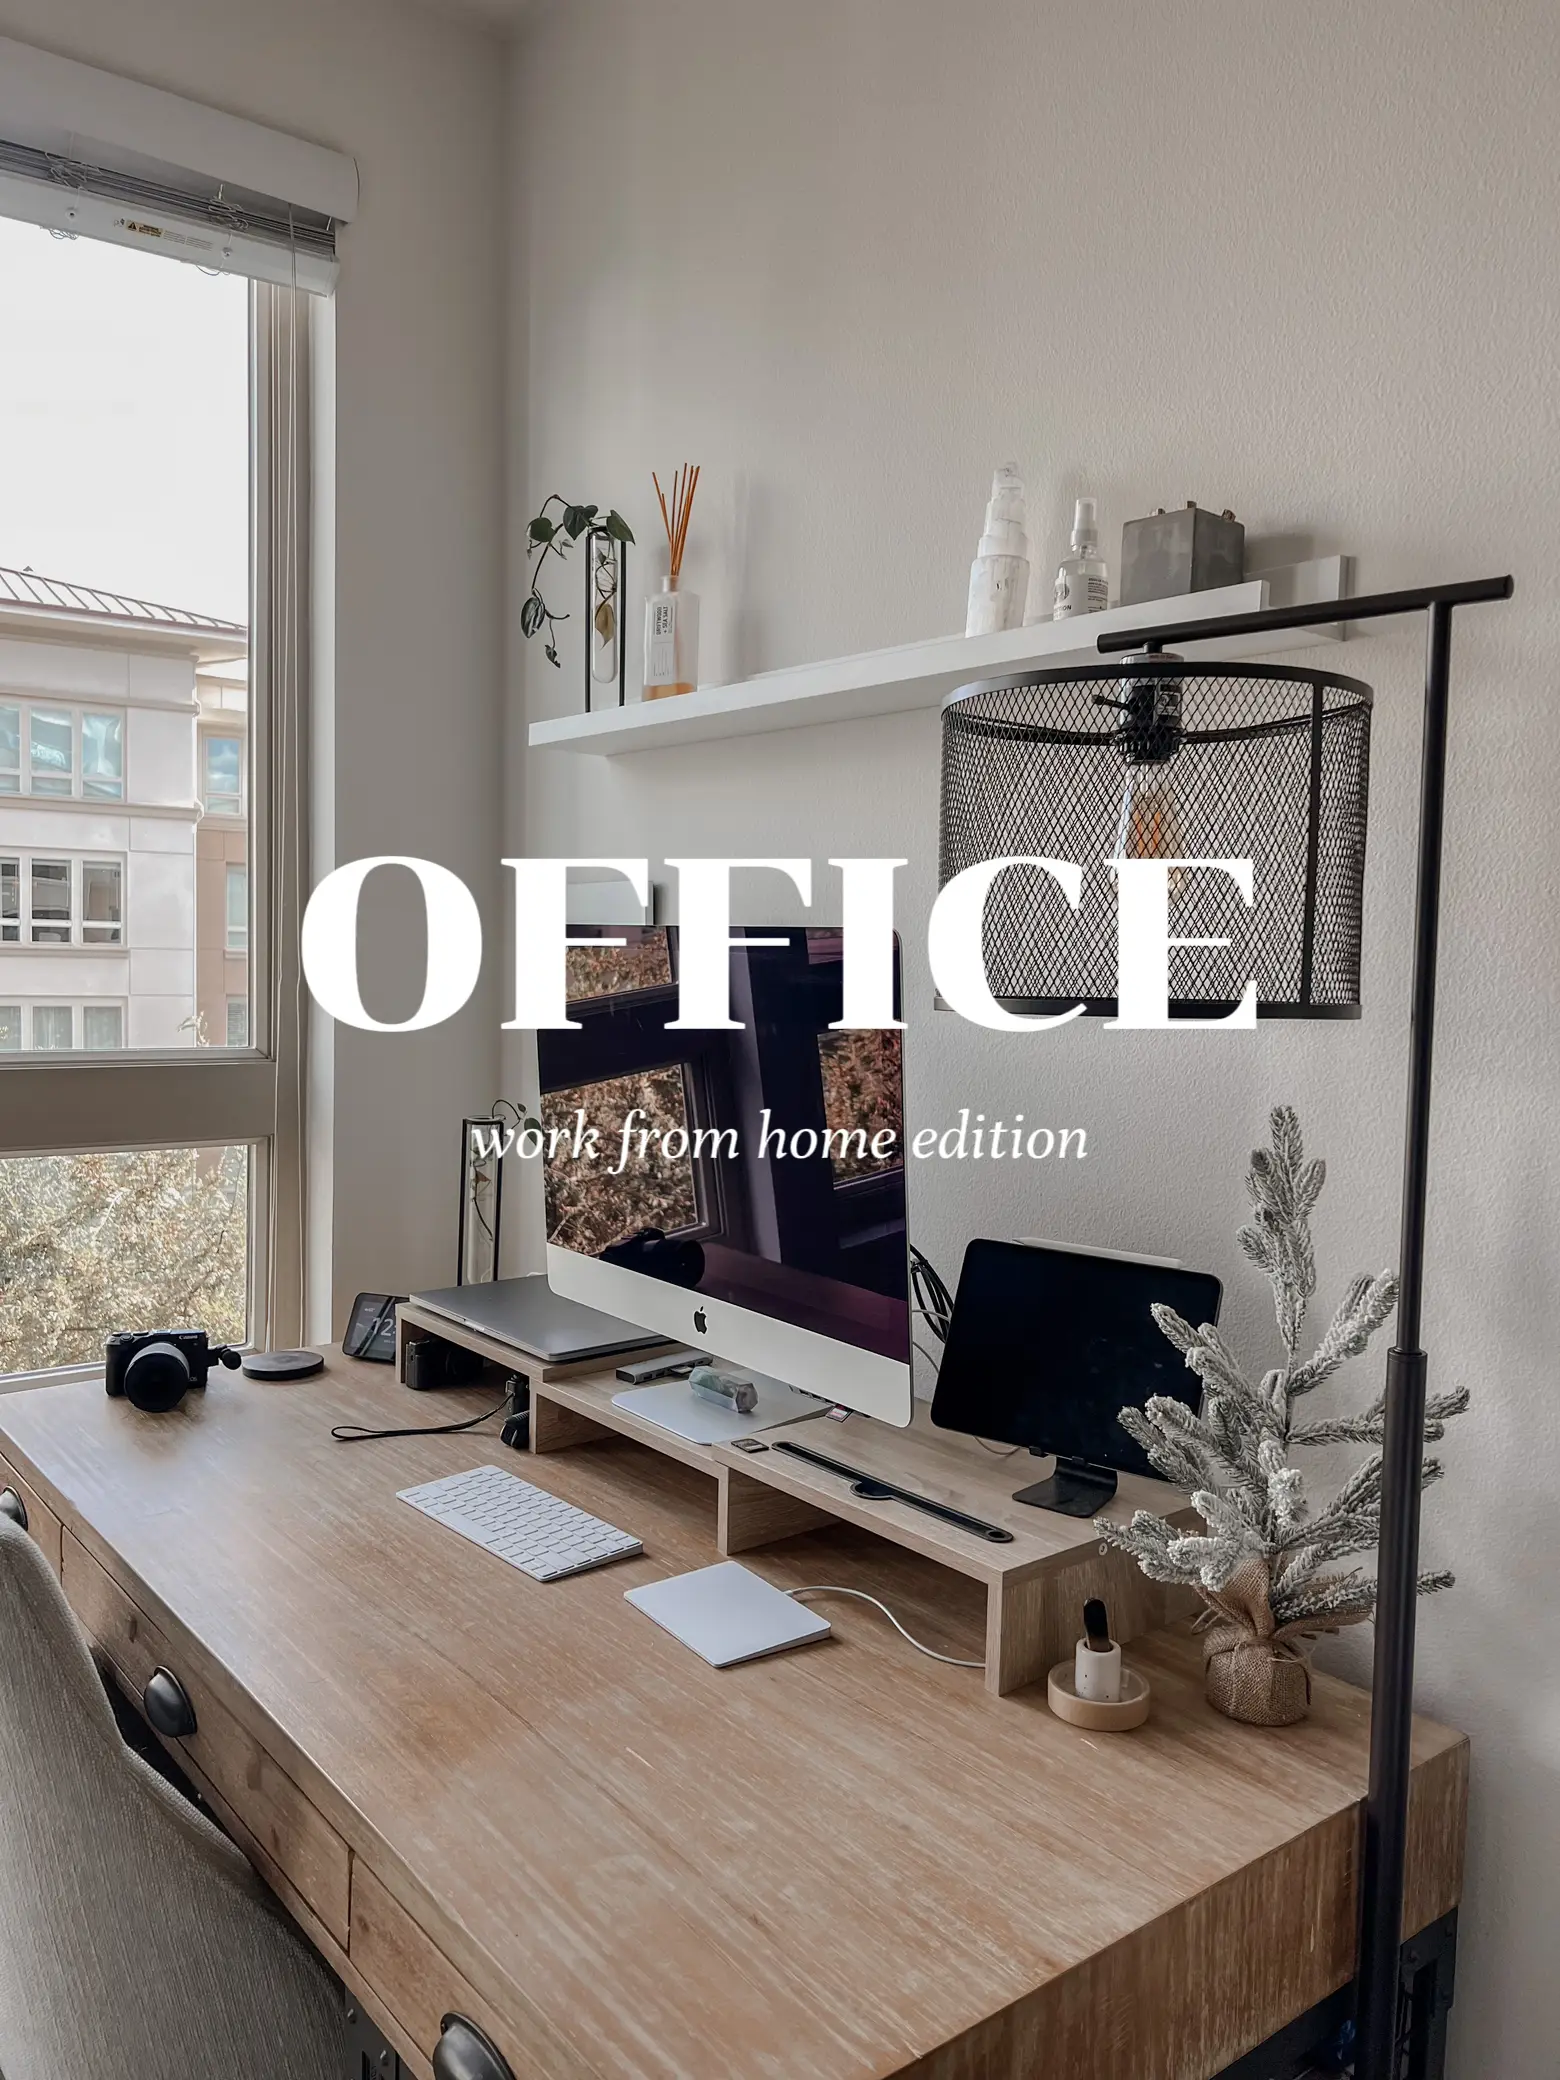 aesthetic & functional office setup, Gallery posted by kaeli mae